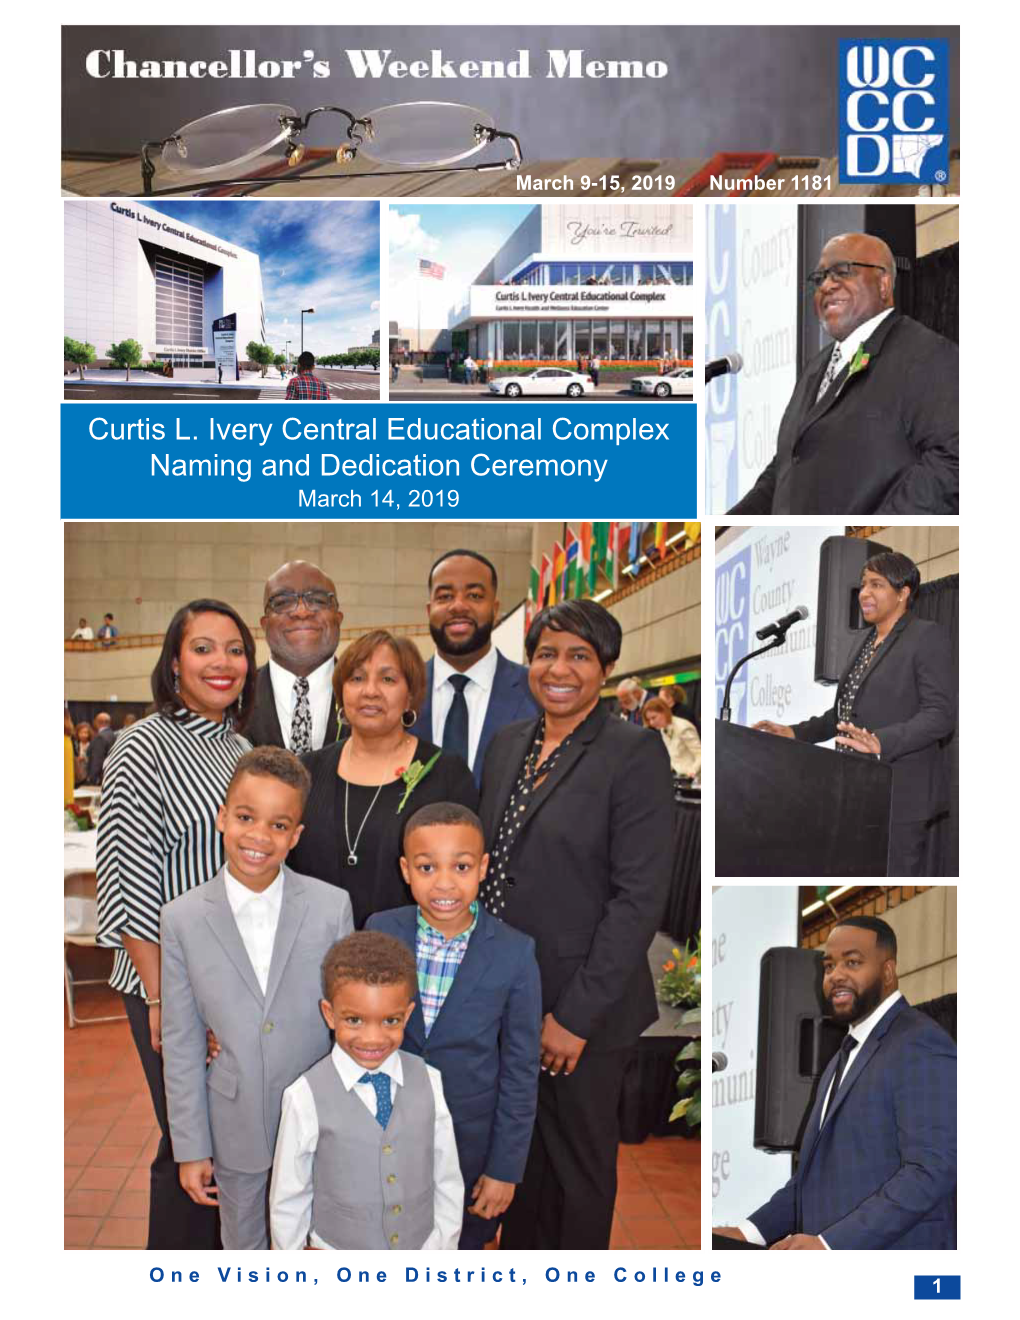 Curtis L. Ivery Central Educational Complex Naming and Dedication Ceremony March 14, 2019